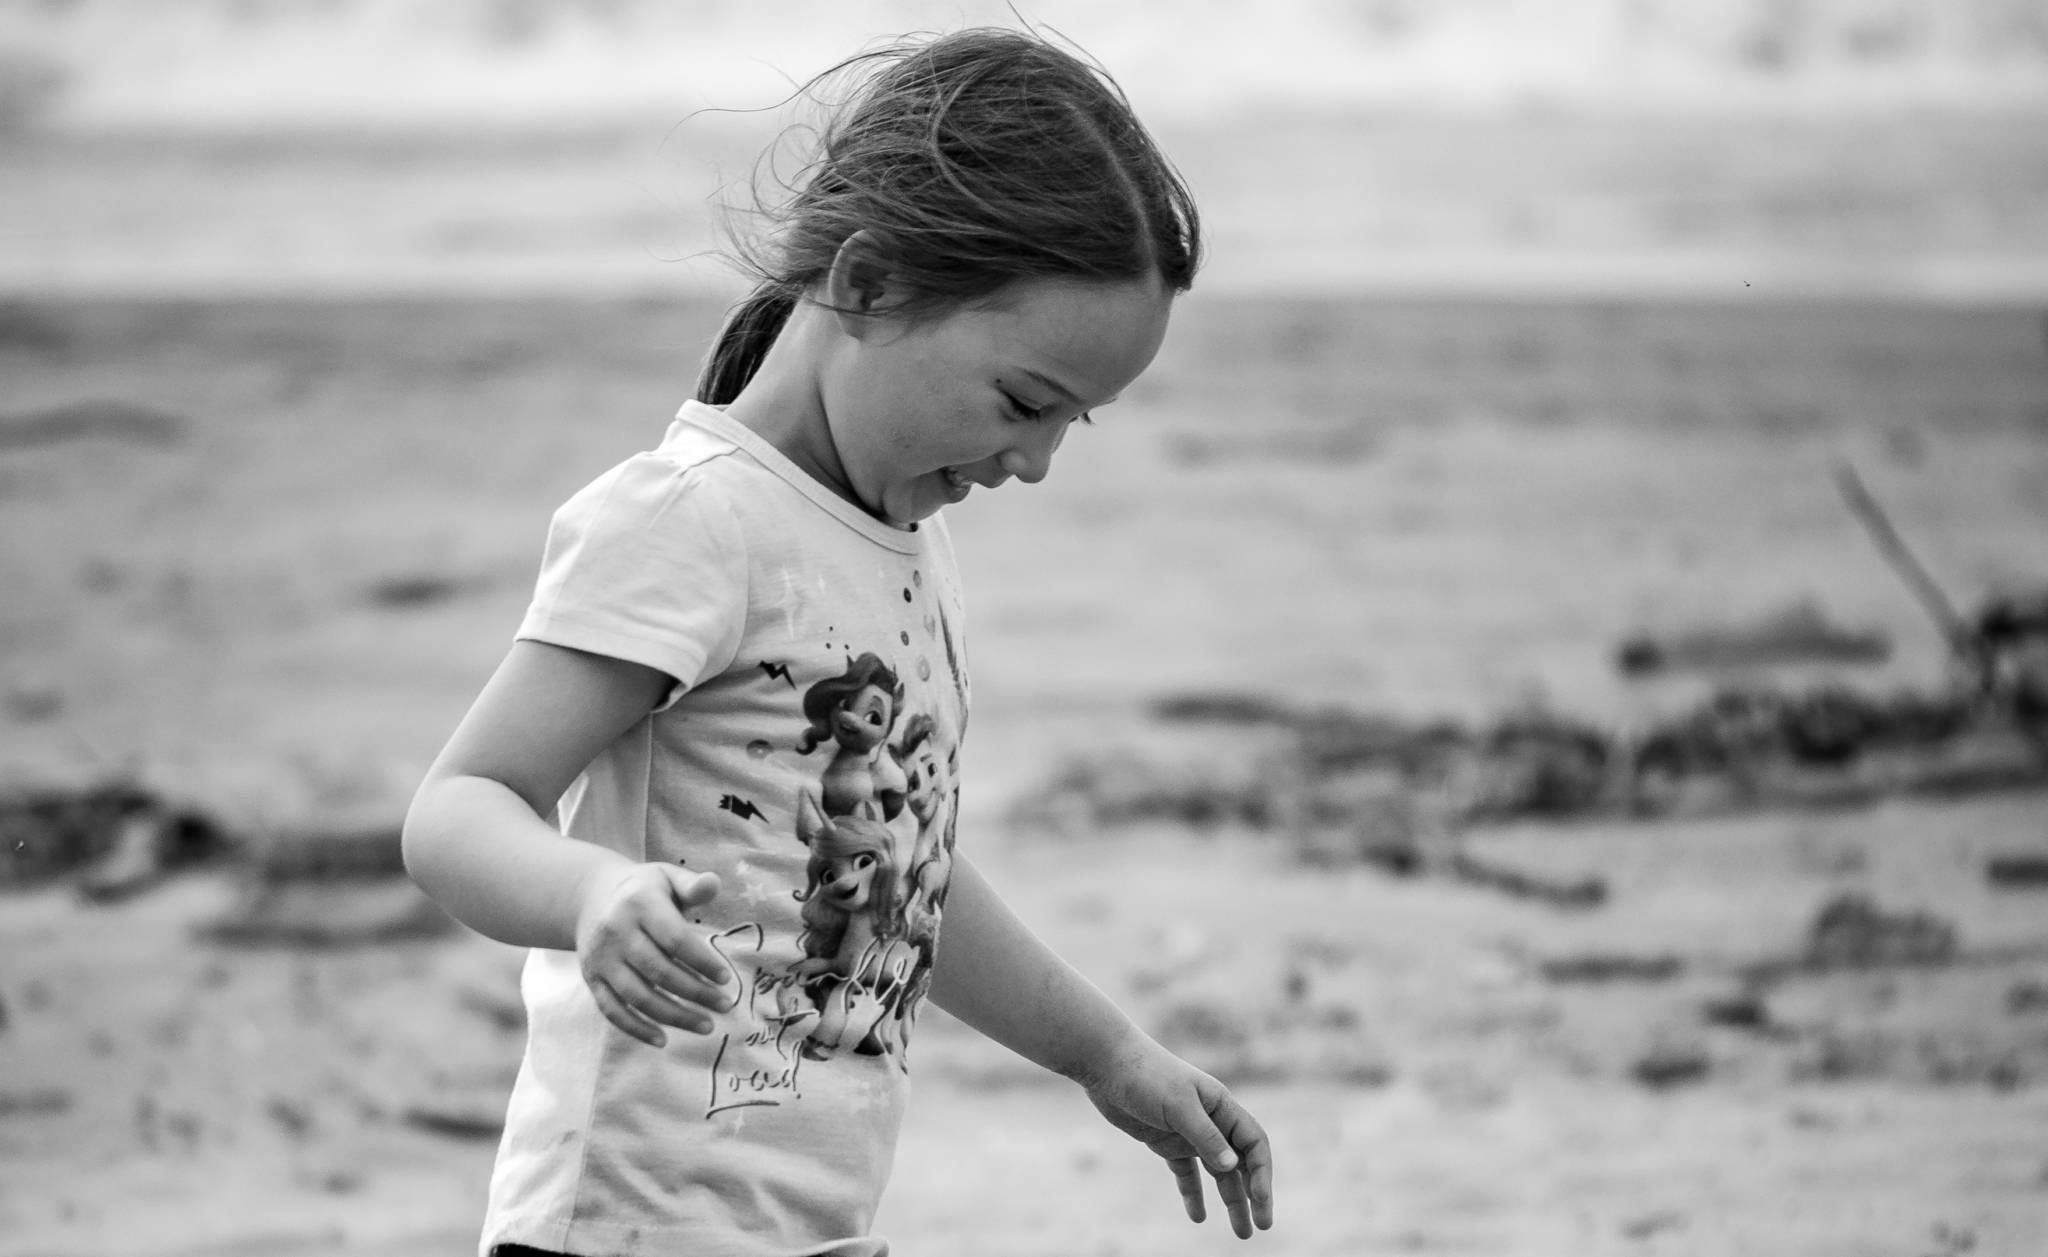 Image of a small girl playing on the beach in the sand